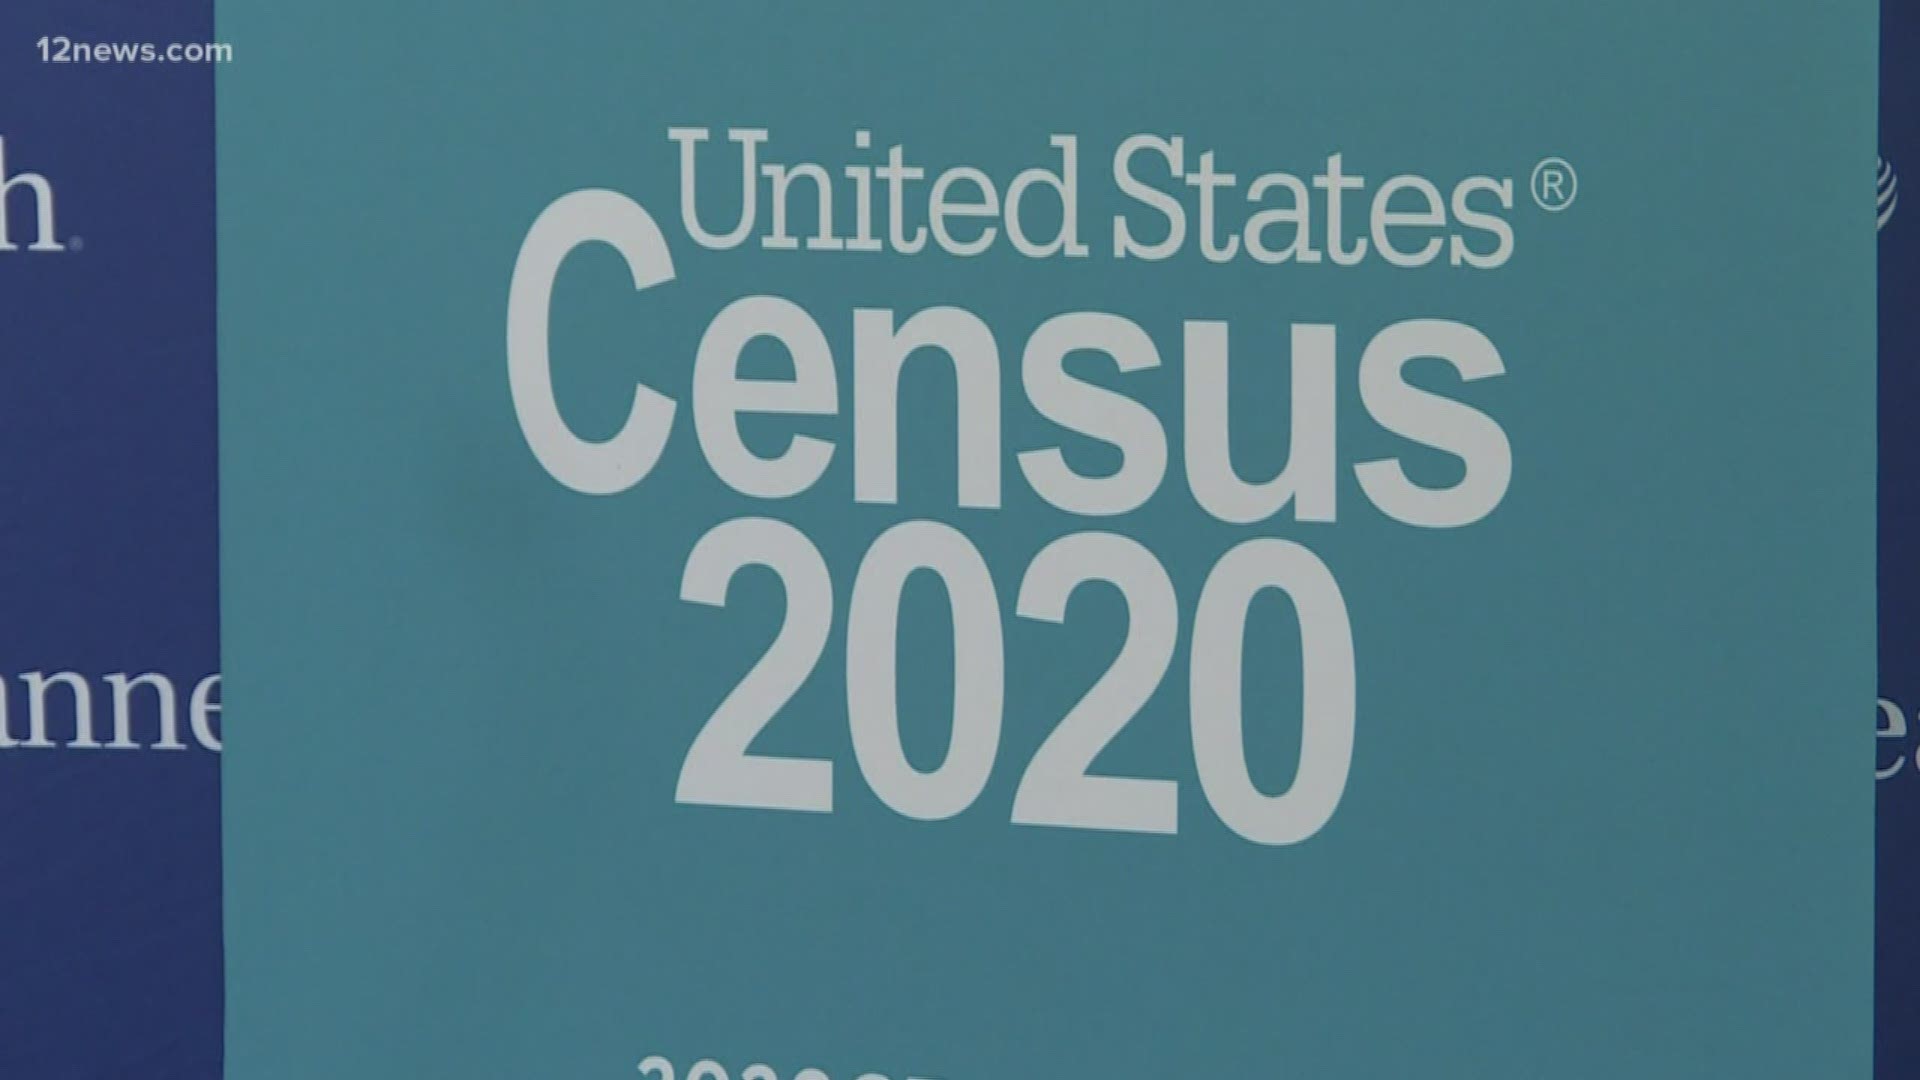 Arizona has seen a large increase in population over the past decade, but not enough to add a congressional seat, according to the U.S. Census.